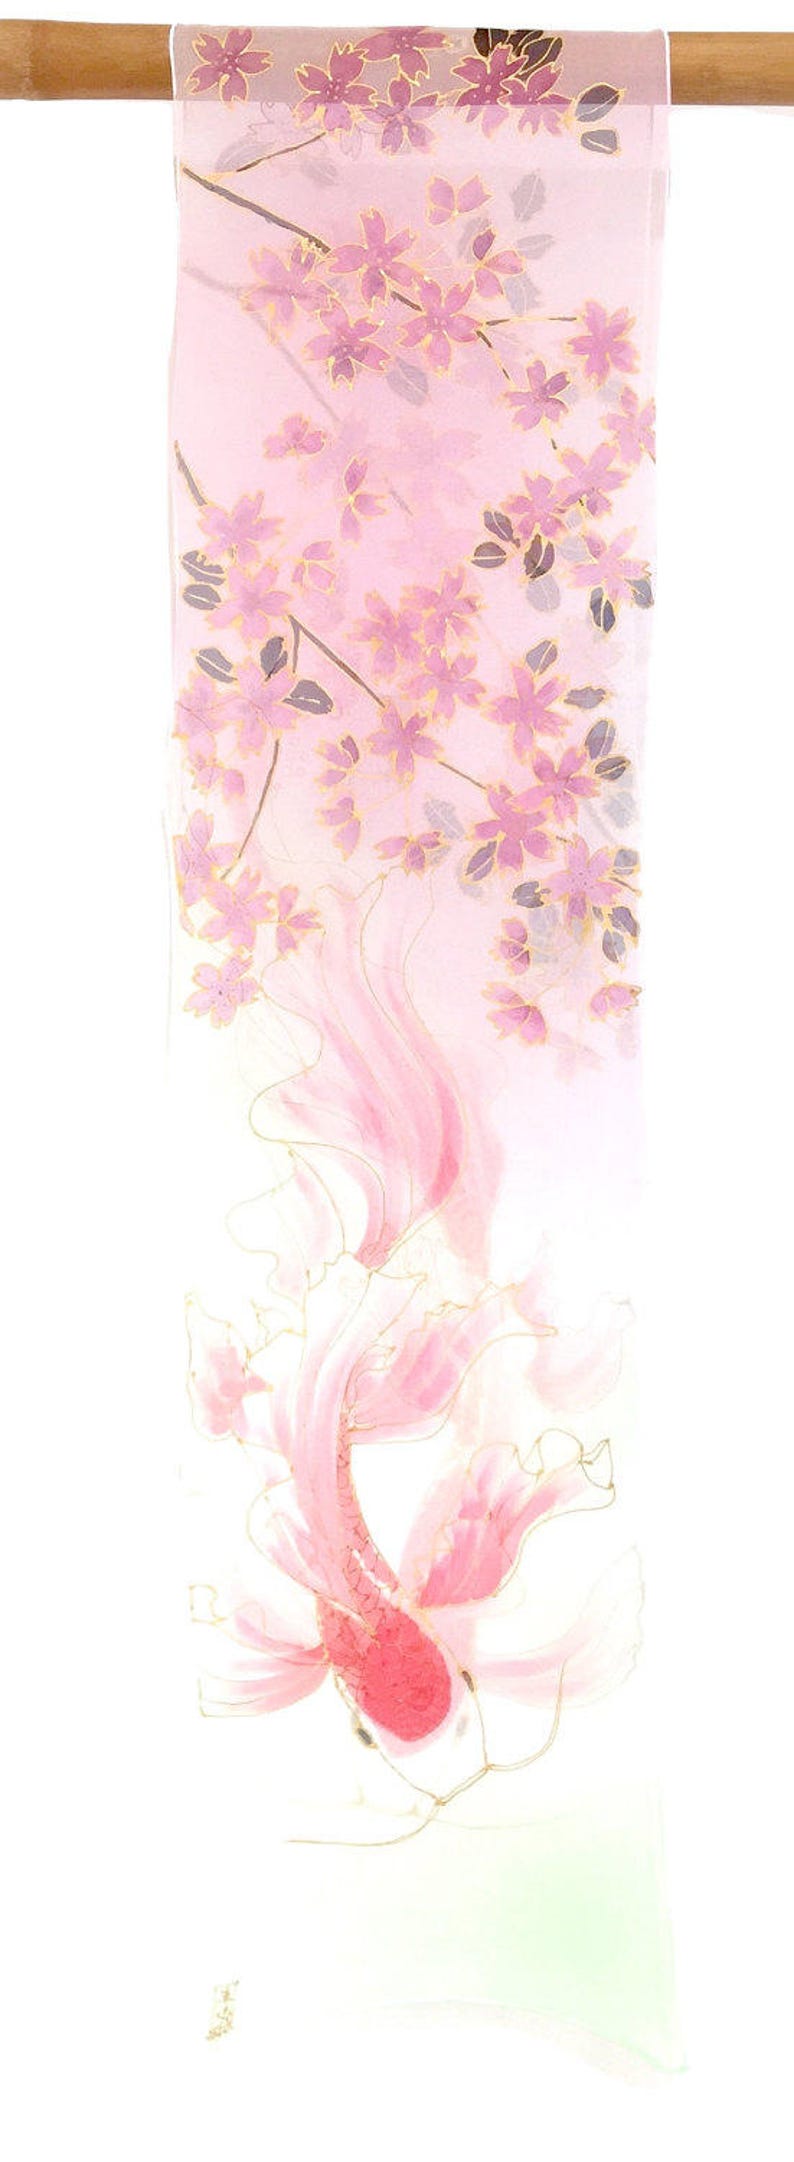 Silk Scarf Women, Handpainted Koi Art, Koi Scarf, Japanese Scarf, Takuyo, Hand Painted Scarf, Pink Cherry Blossom and Red Koi, made to order image 2